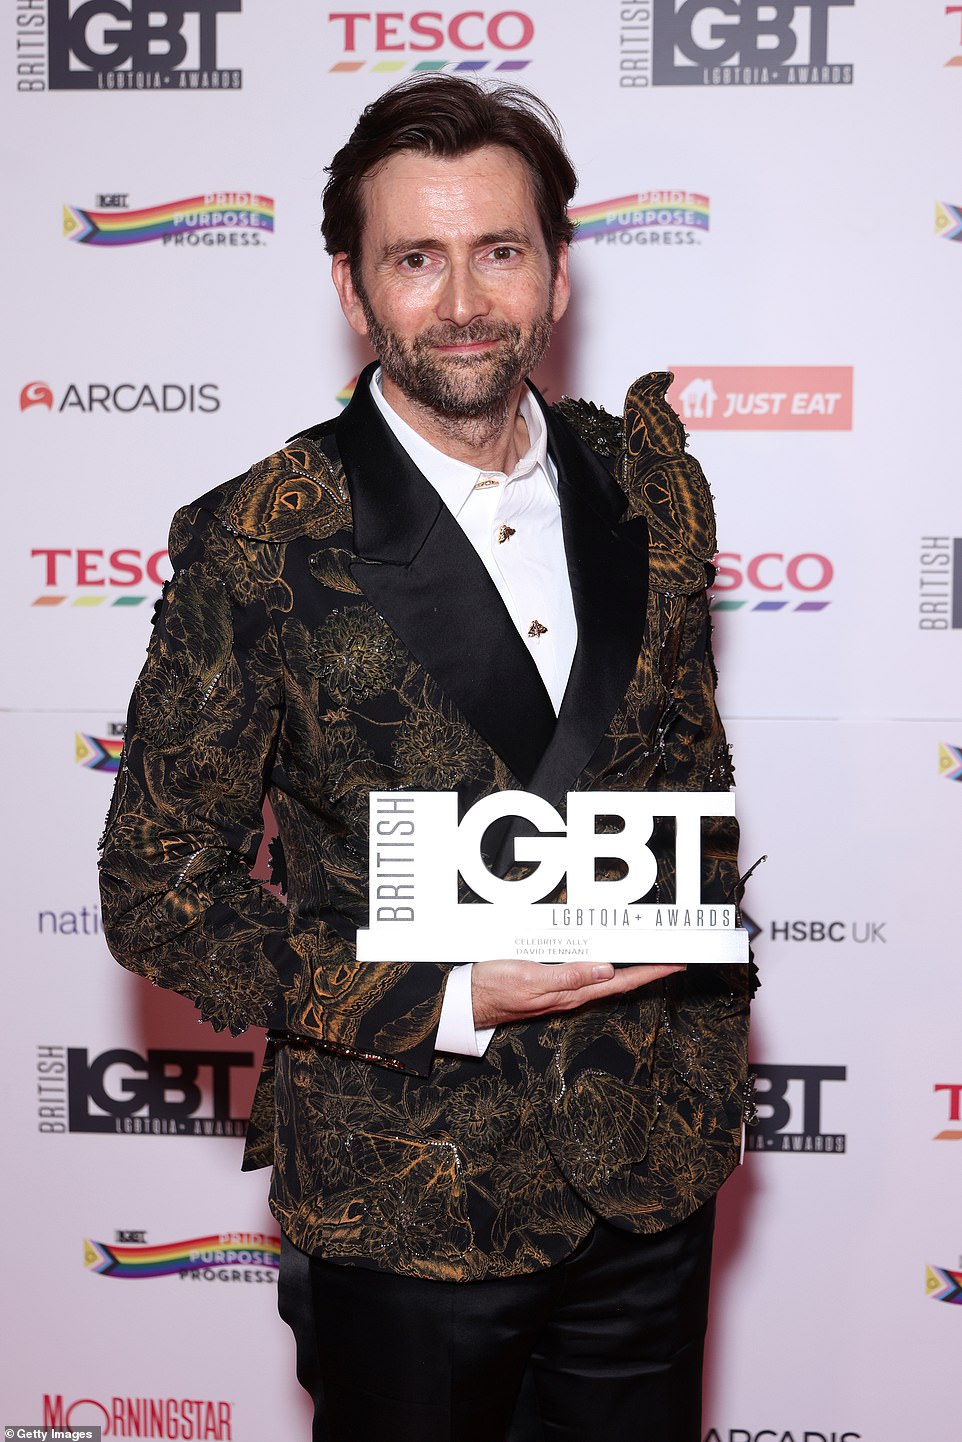 David Tennant won the LGBT+ Celebrity Ally Award for his advocacy for transgender people